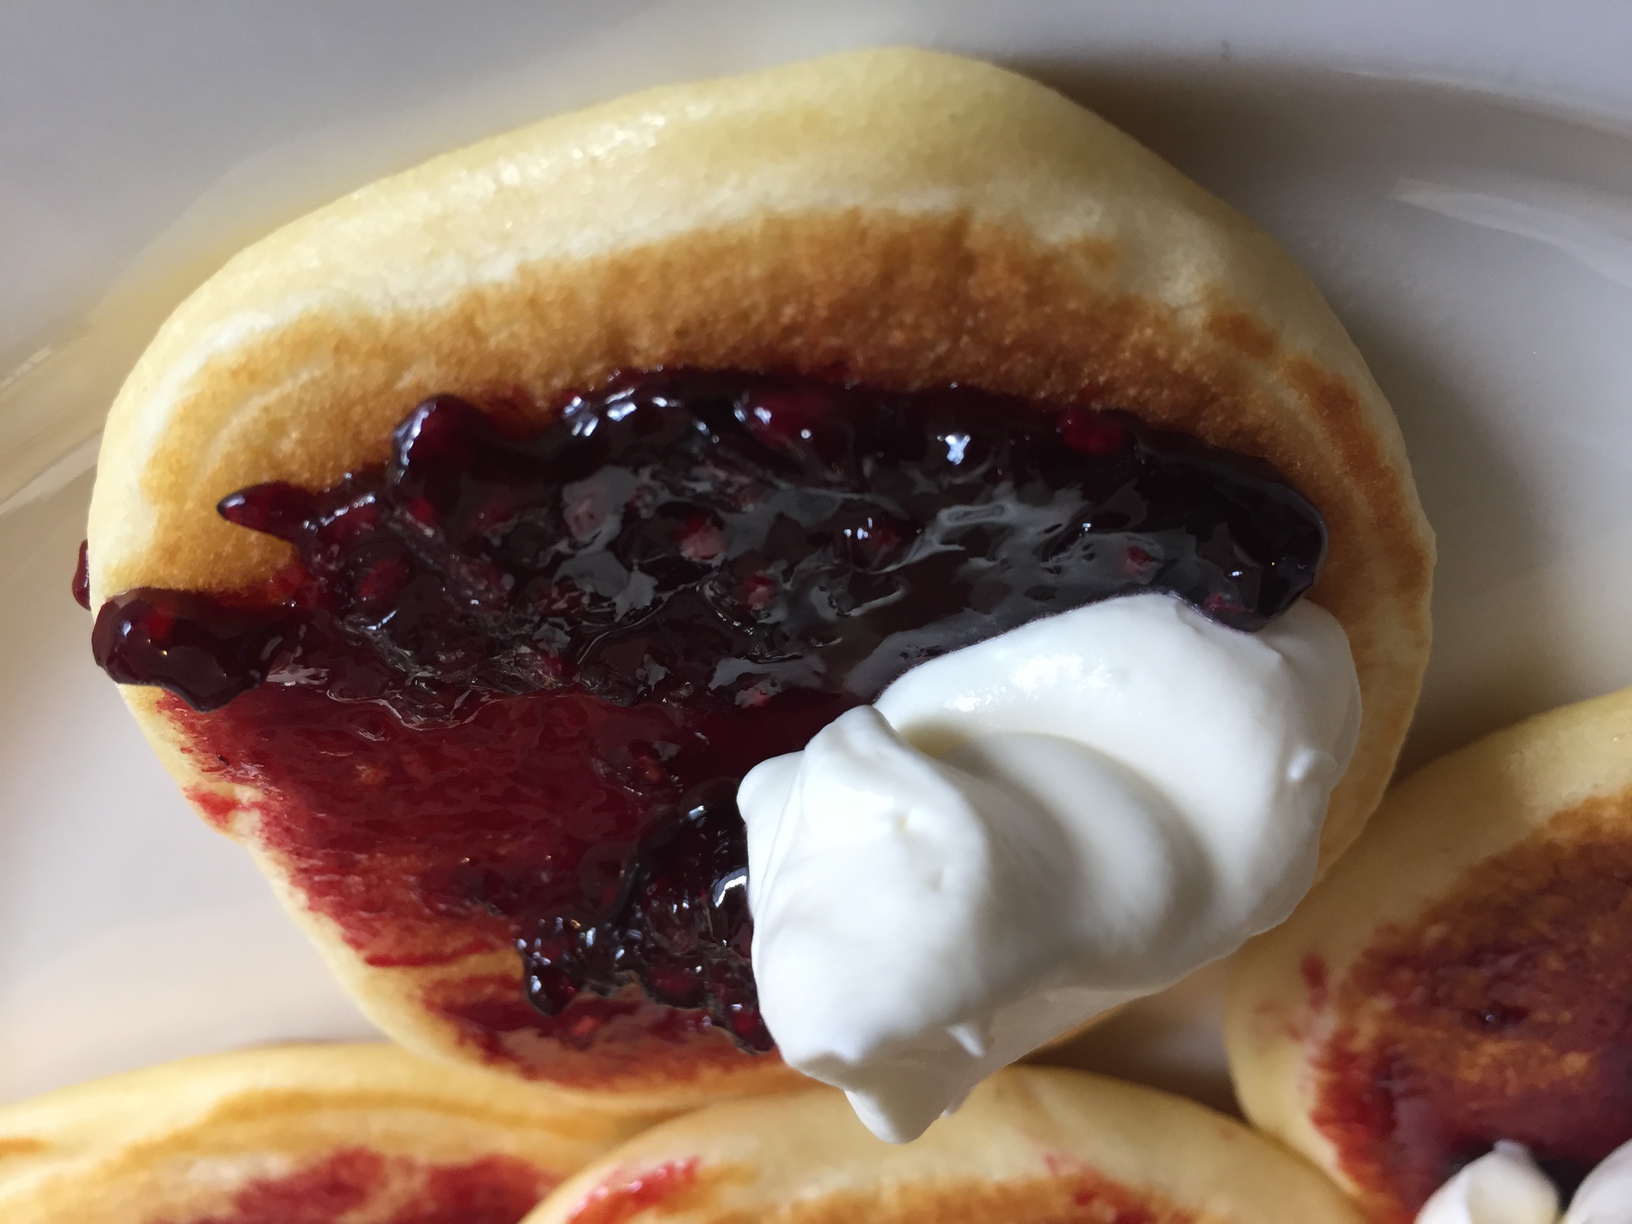 We had the blackberry jam on some pikelets with whipped cream